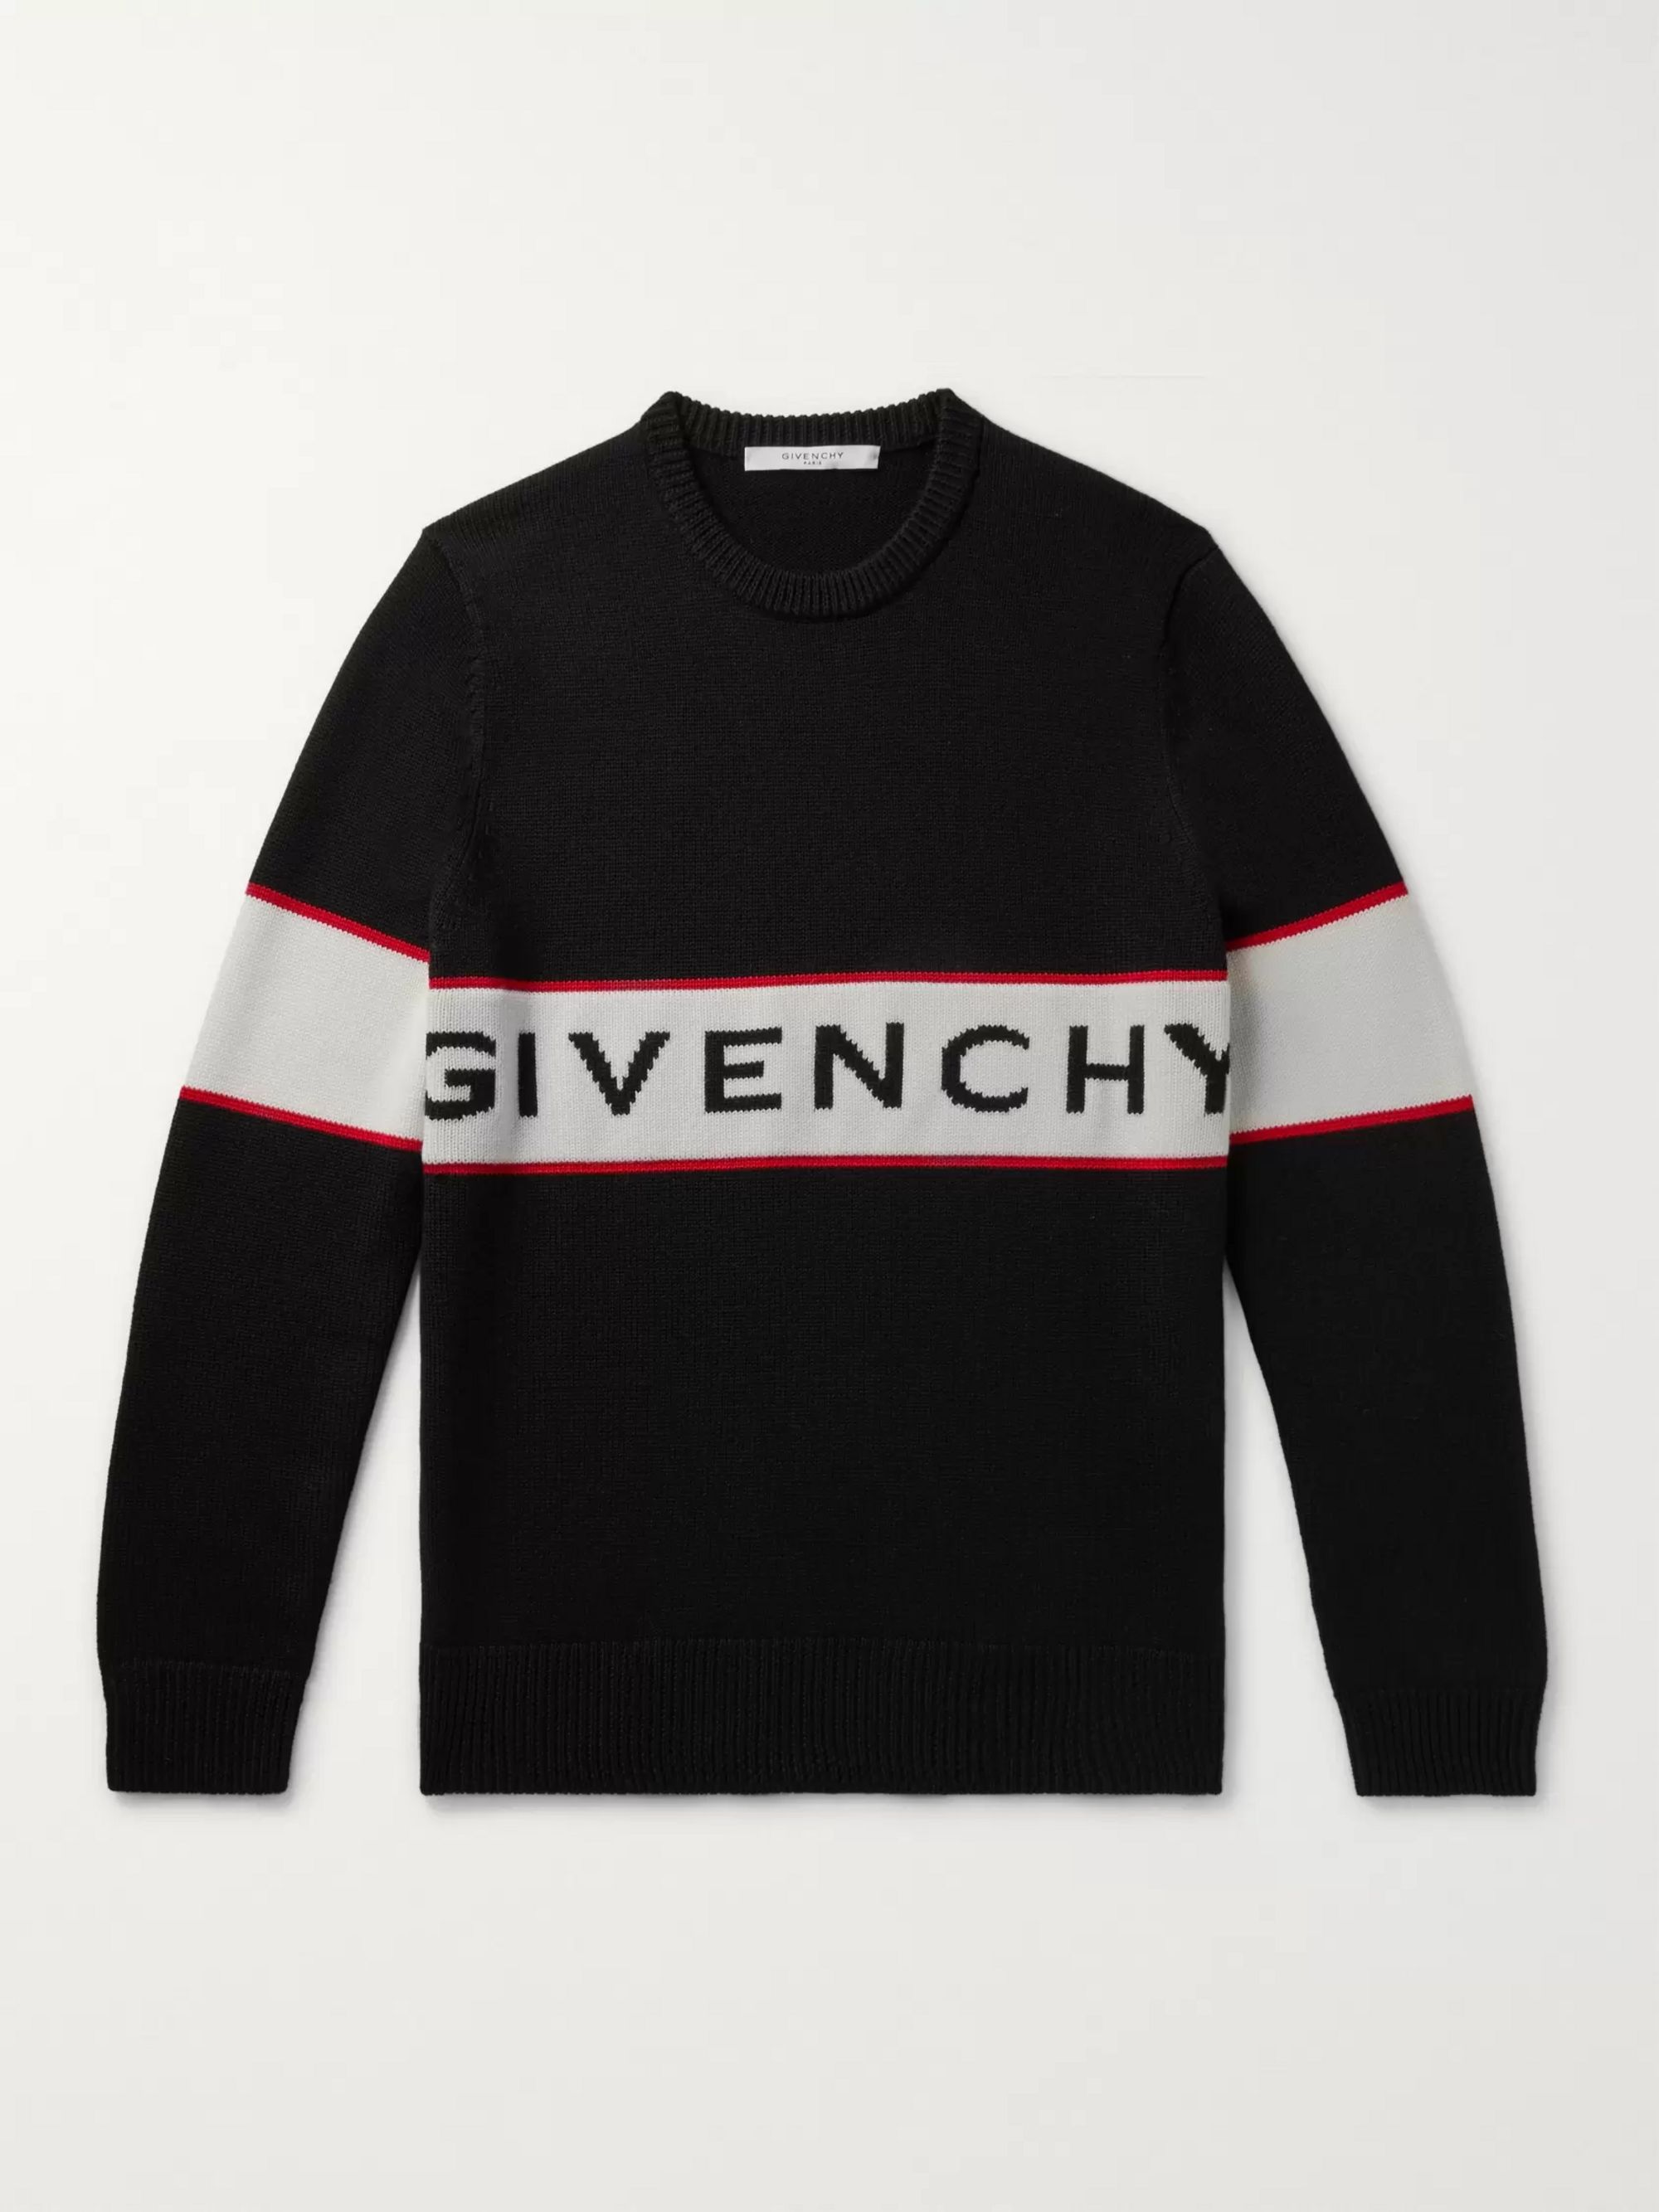 givenchy white sweater